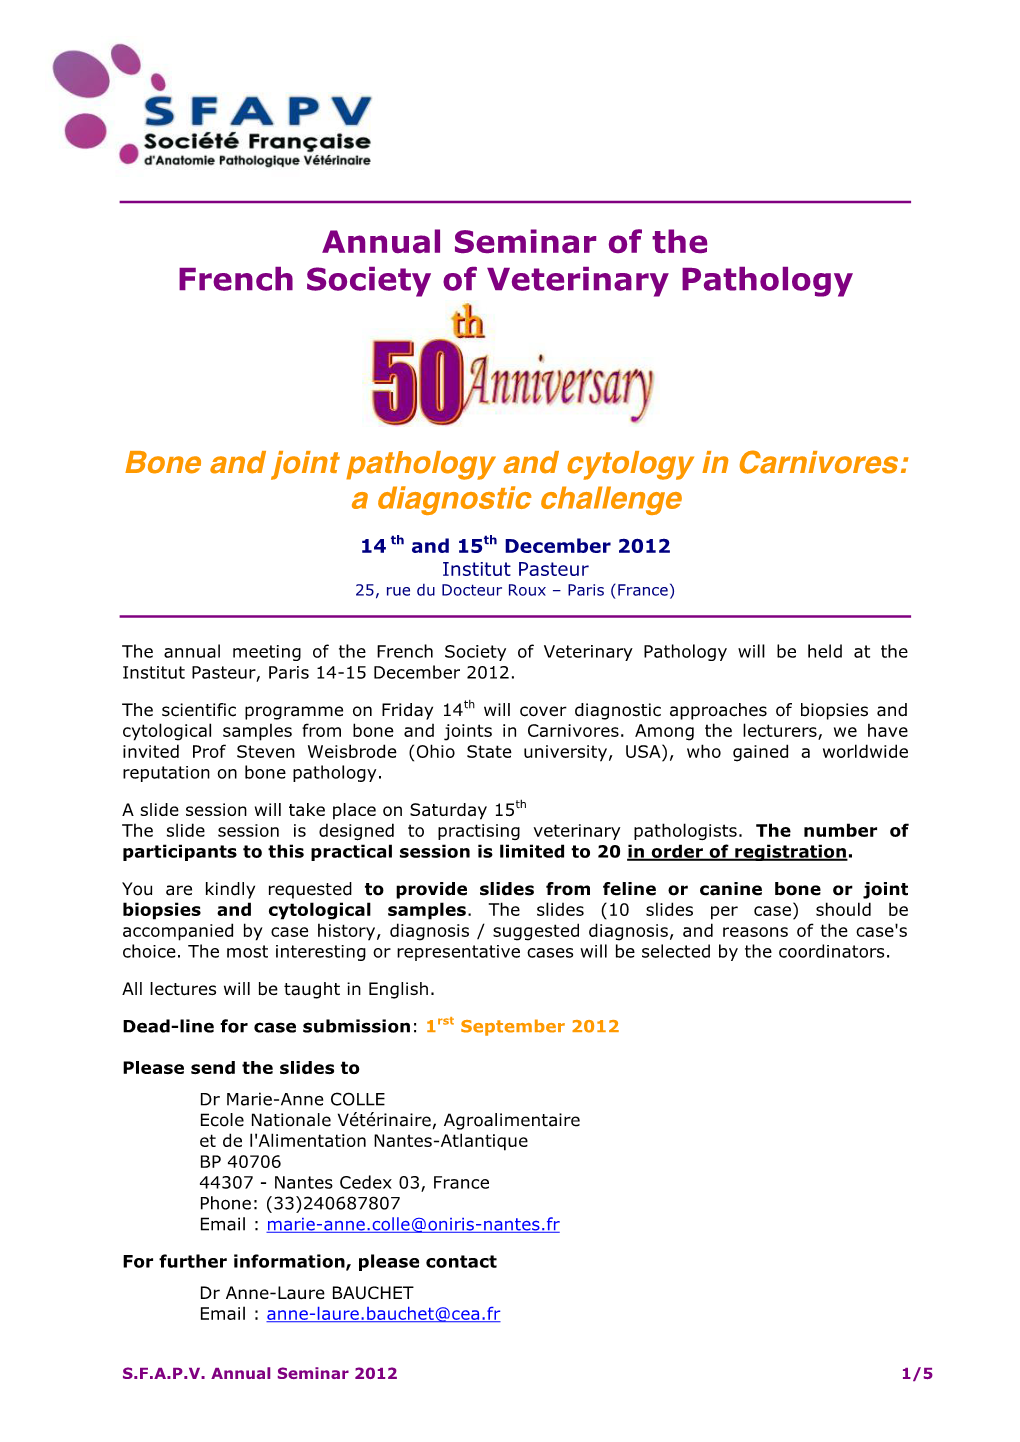 Annual Seminar of the French Society of Veterinary Pathology